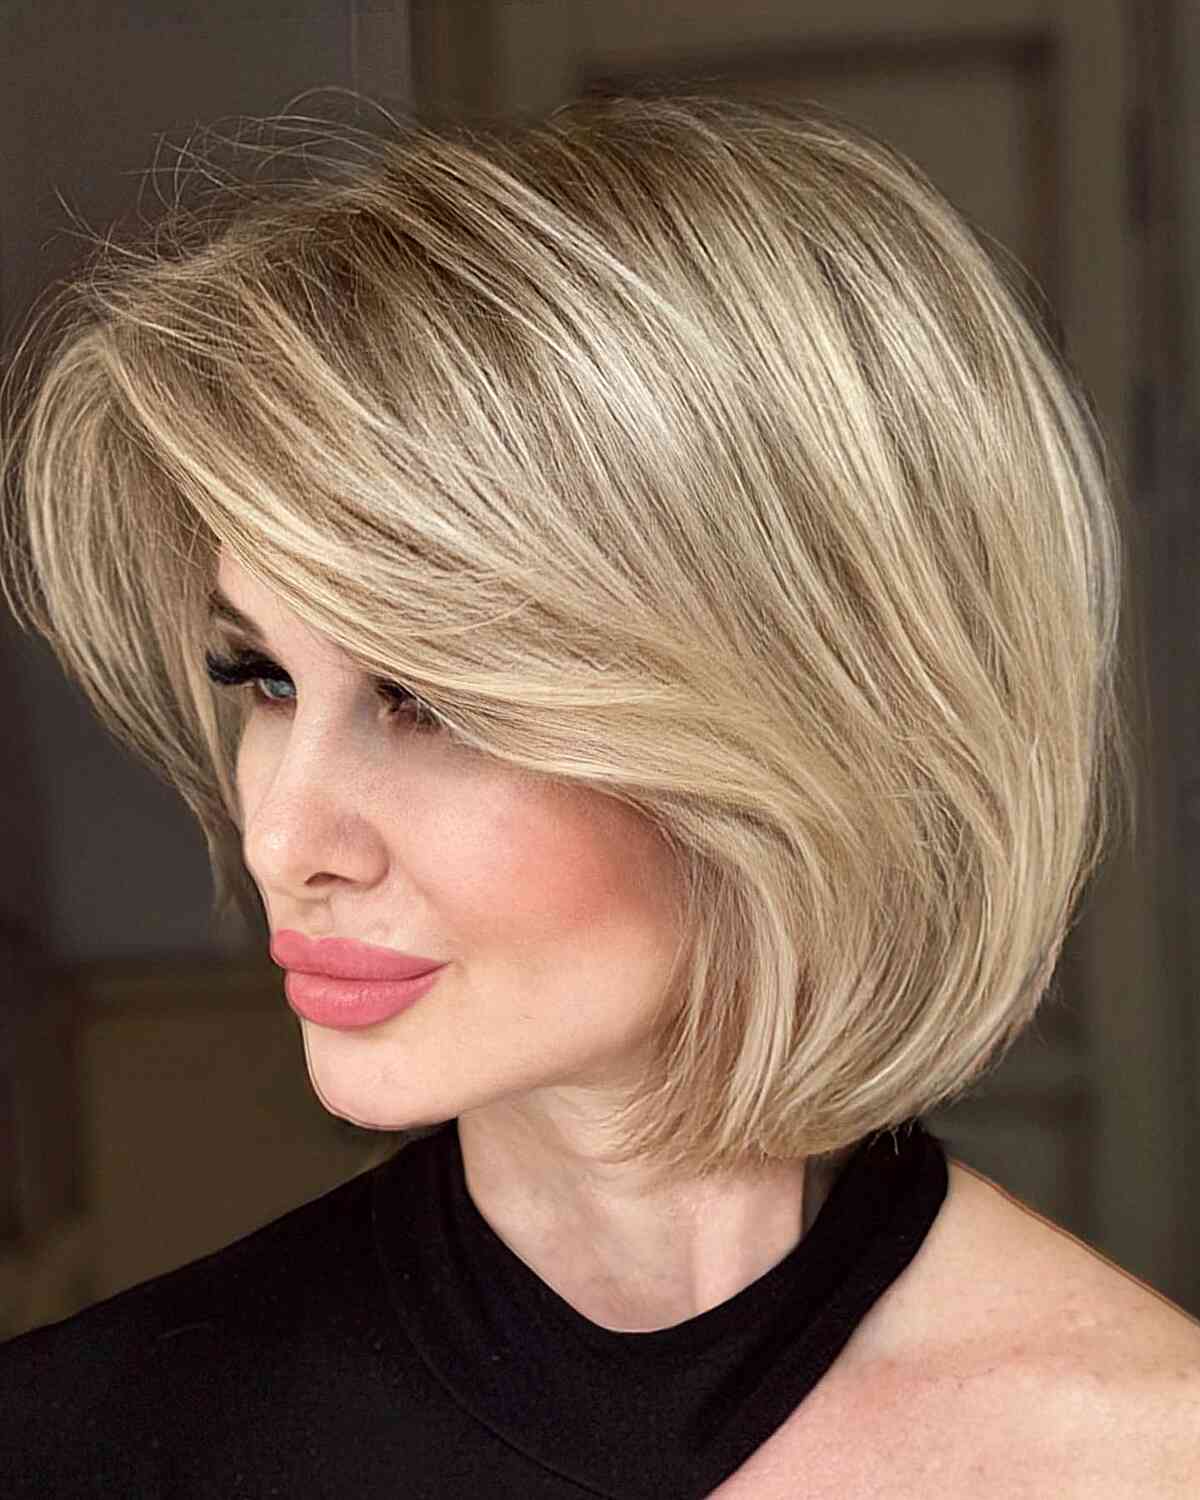 Long Curtain Bangs on a Layered Bob for women with short blonde hair